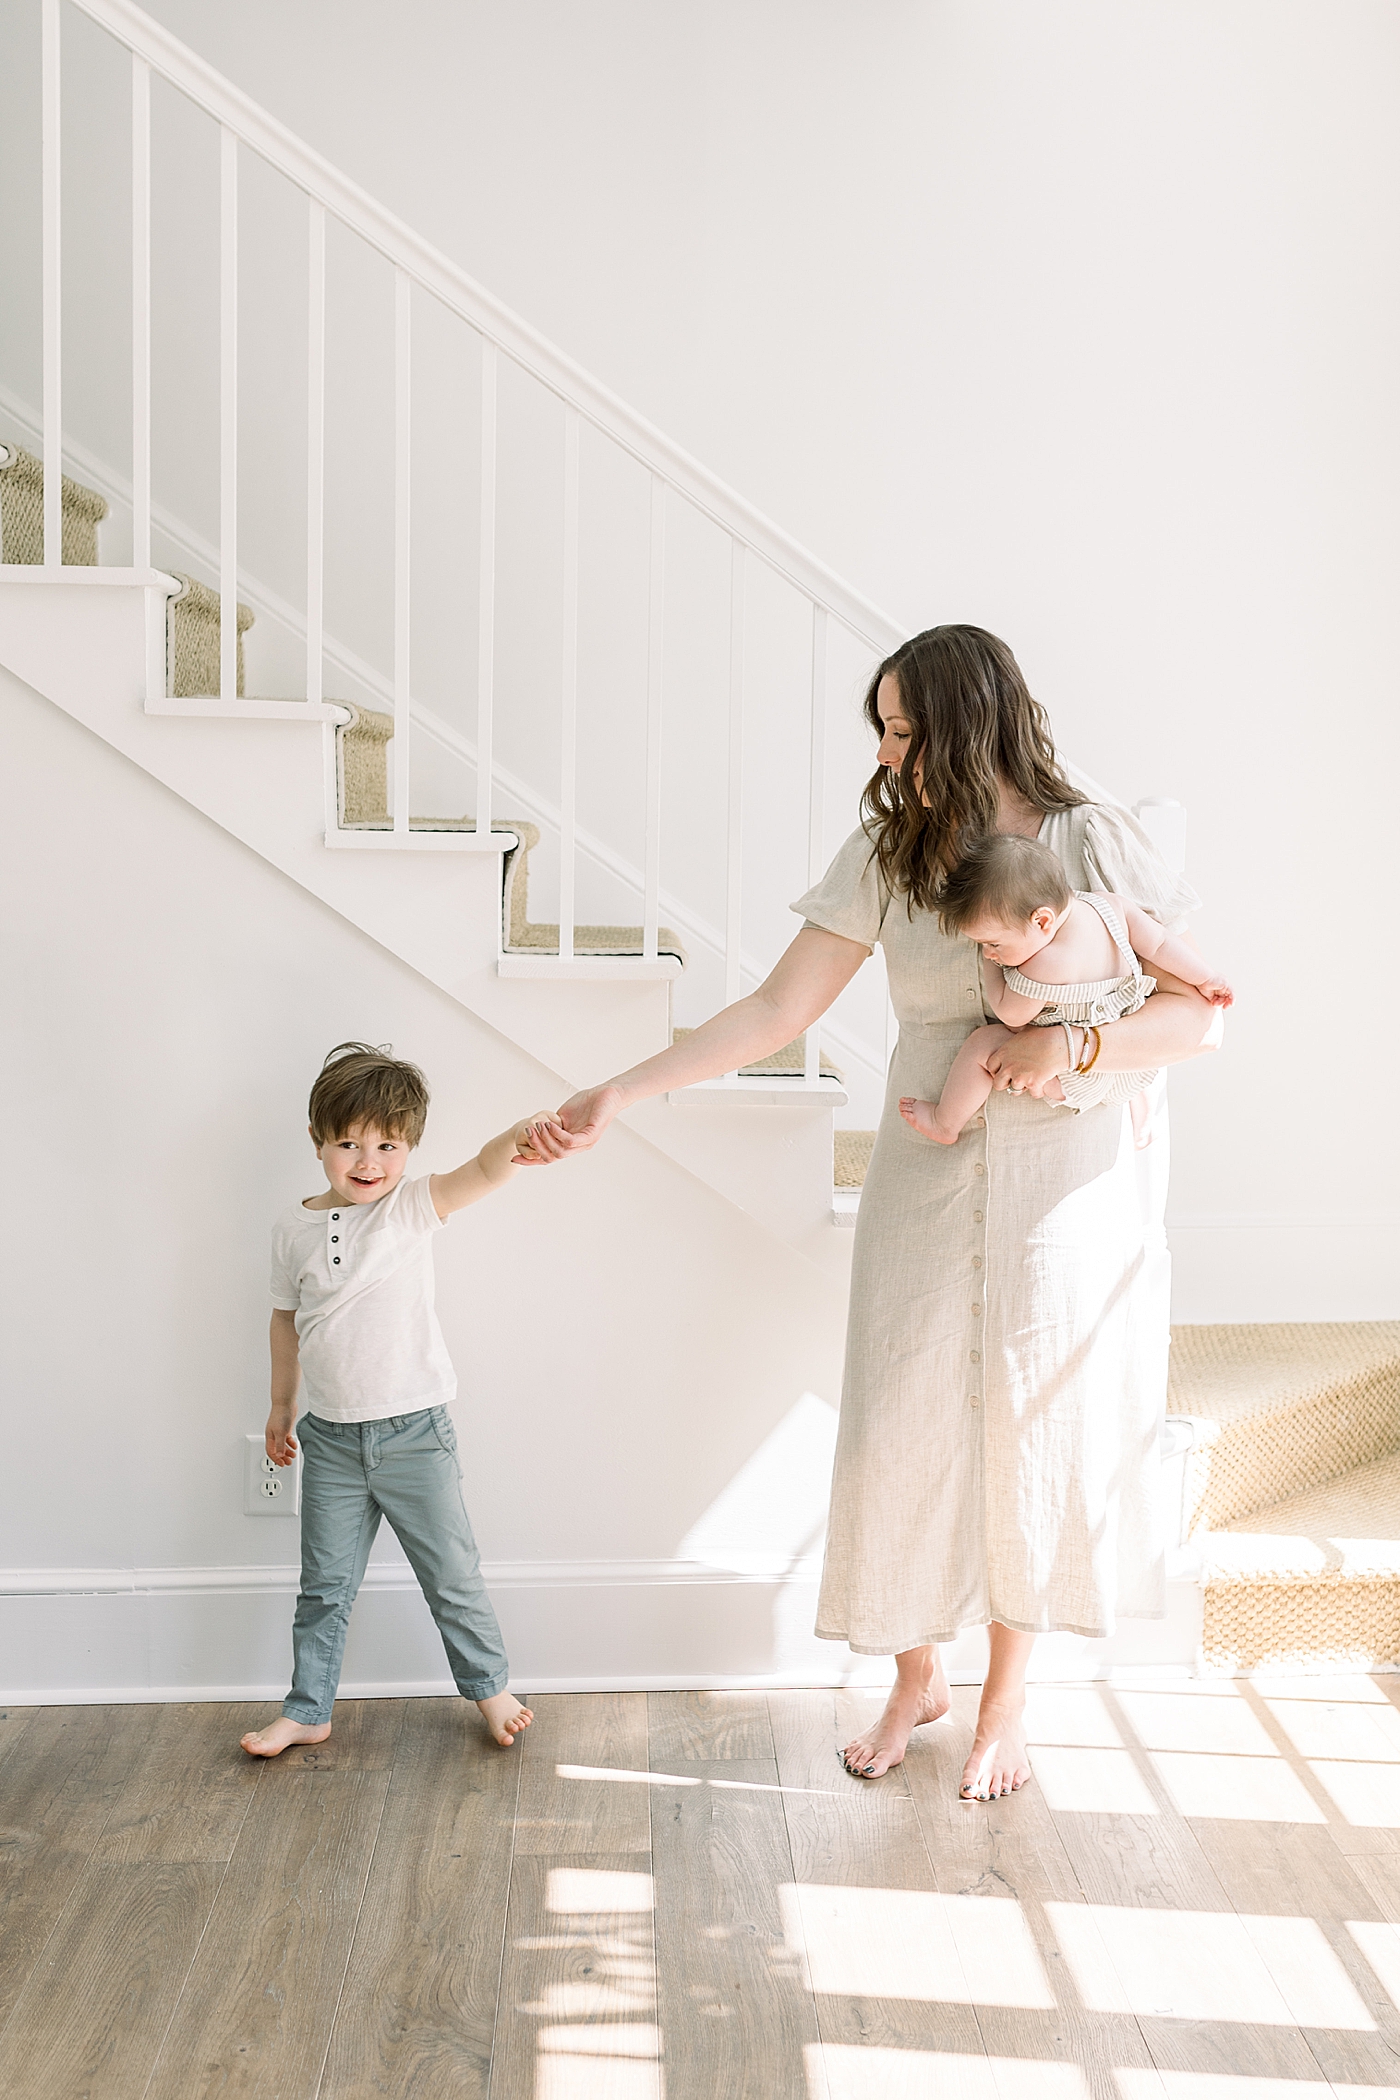 Mother holding her baby and the hand of her young son in a white, simple entry way | Image by Caitlyn Motycka 